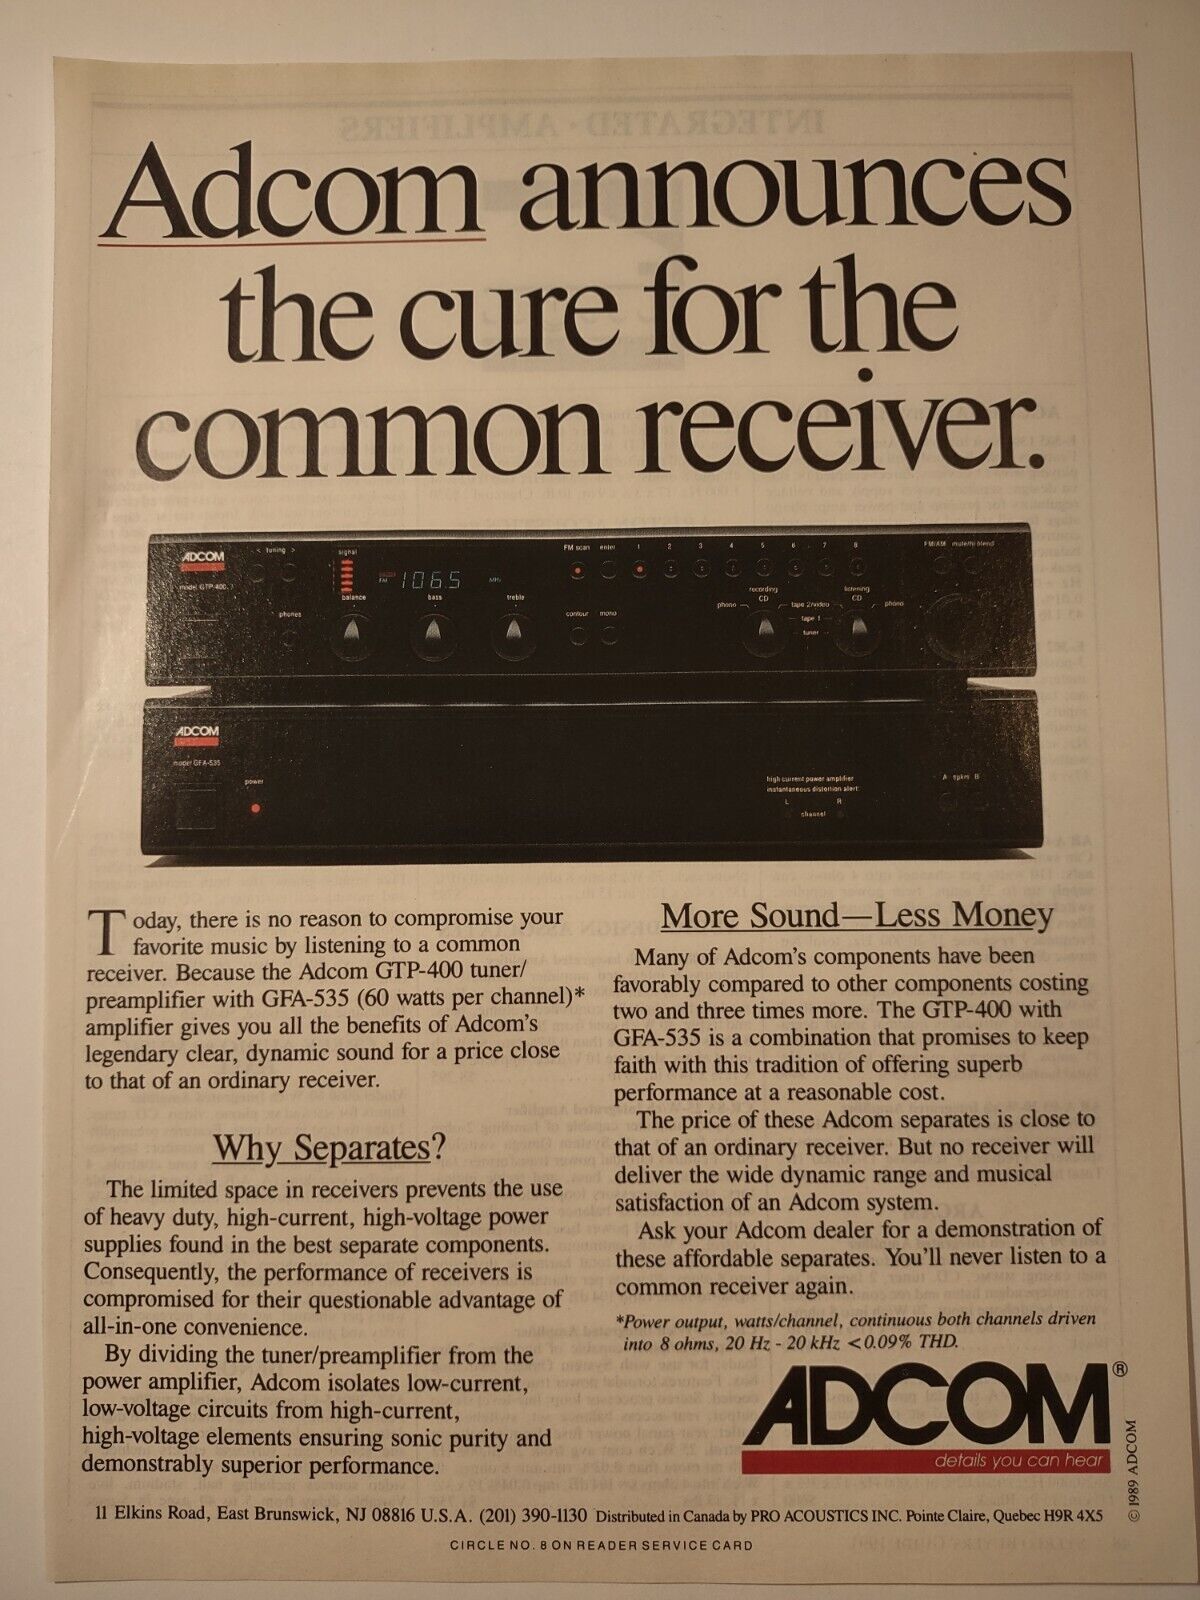 Adcom GFA 535 Amplifier Cure for Common Receiver Vintage Print Ad